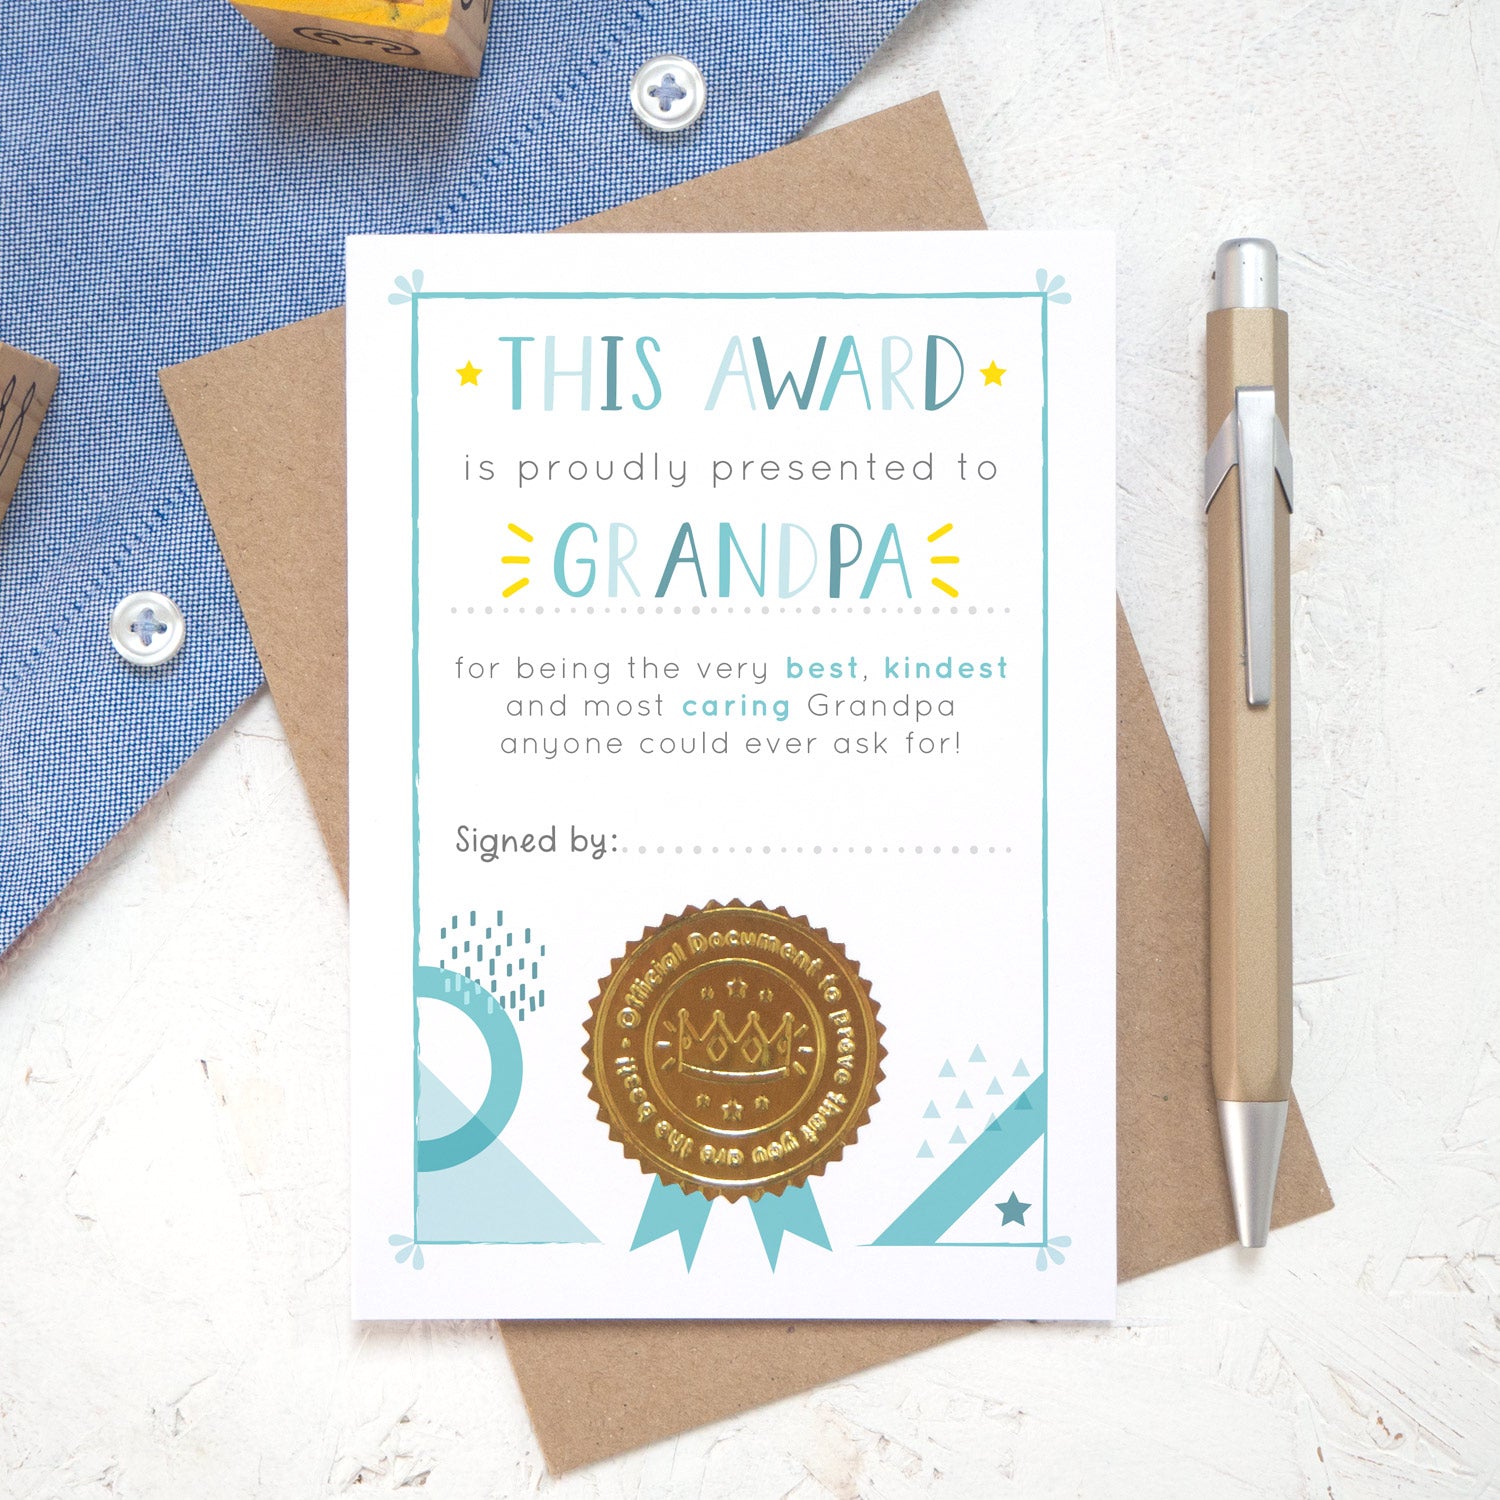 A Grandpa certificate award card printed onto white card in varying tones of blue and pops of yellow! Each card features a shiny gold seal to make it official! Photographed on a white background with a hint of a blue shirt and a brown kraft envelope.